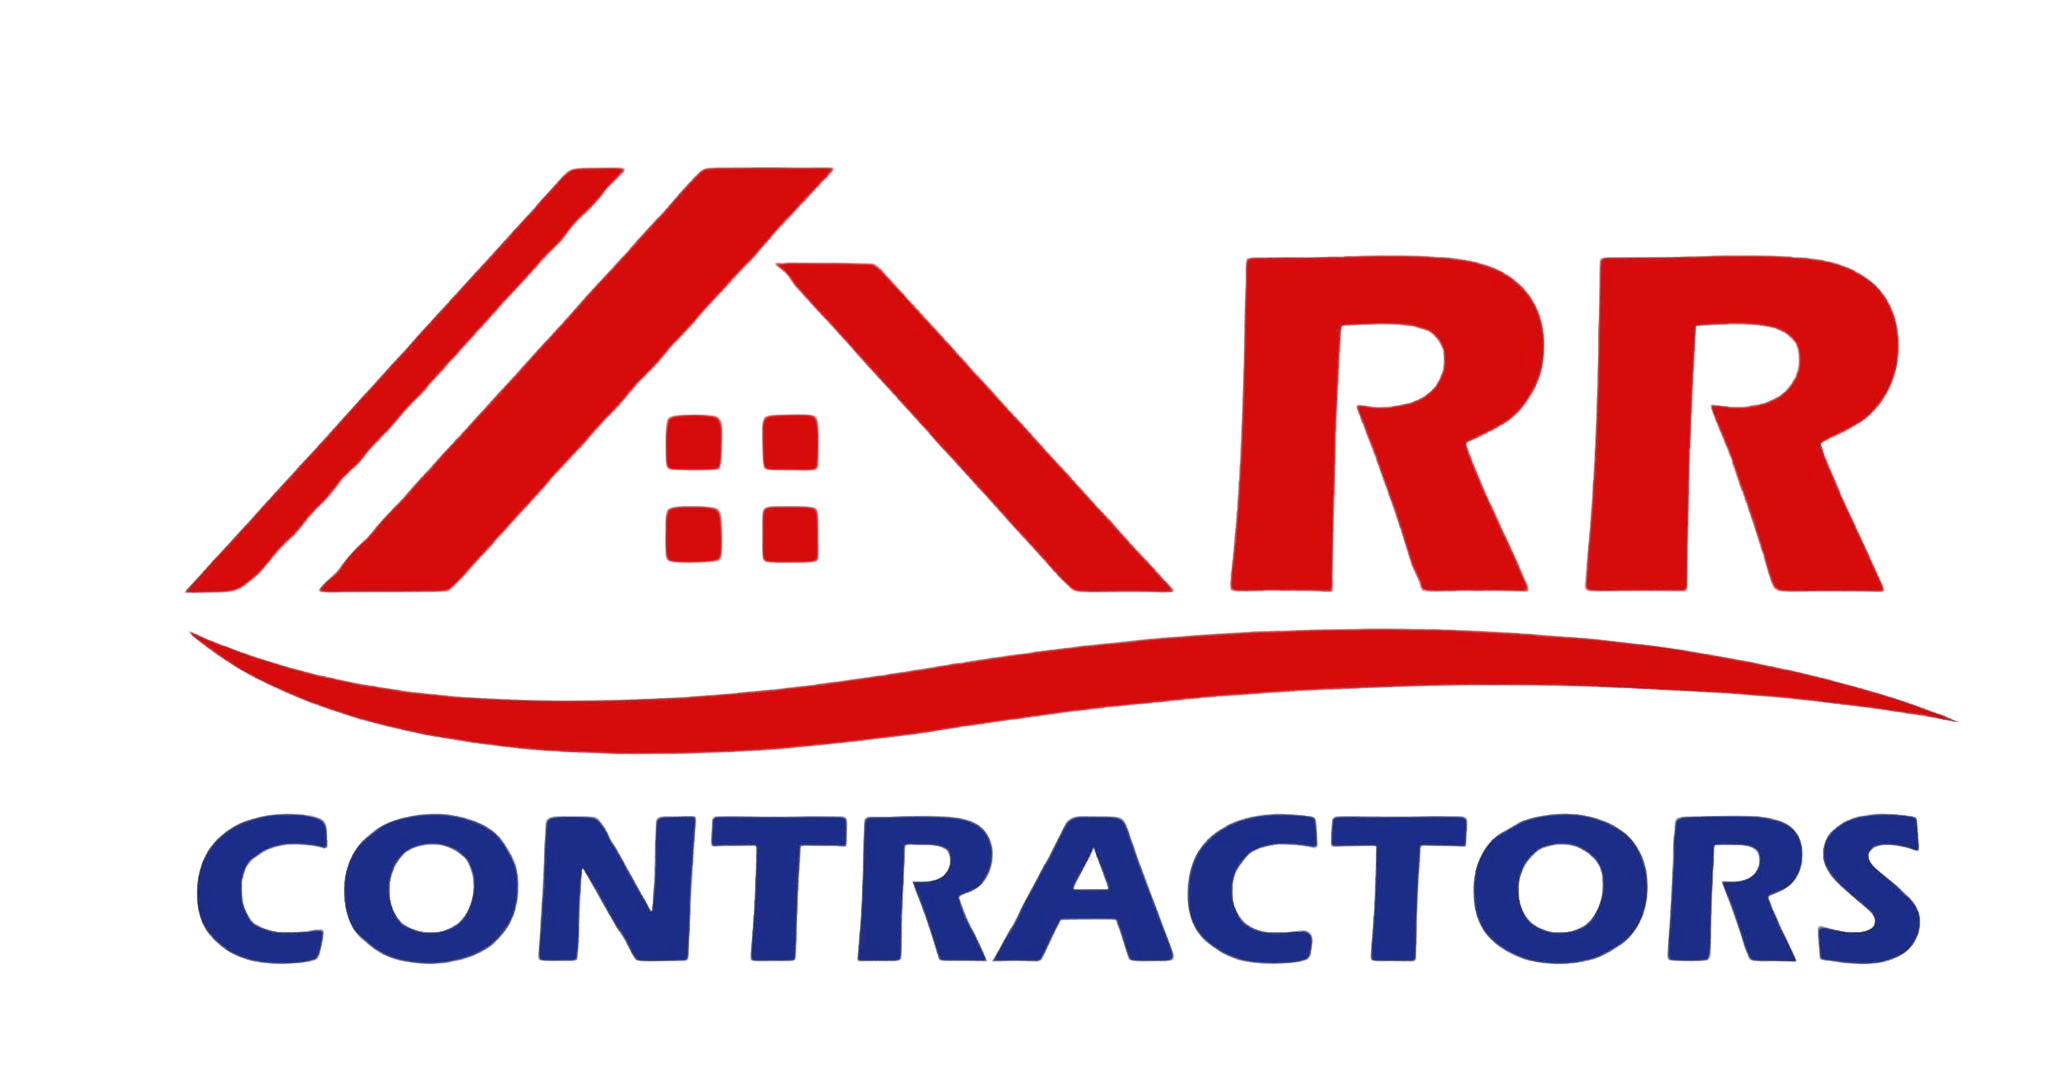 ARR Contractors logo: a sleek, modern design featuring the initials "ARR" in bold, capitalized letters.